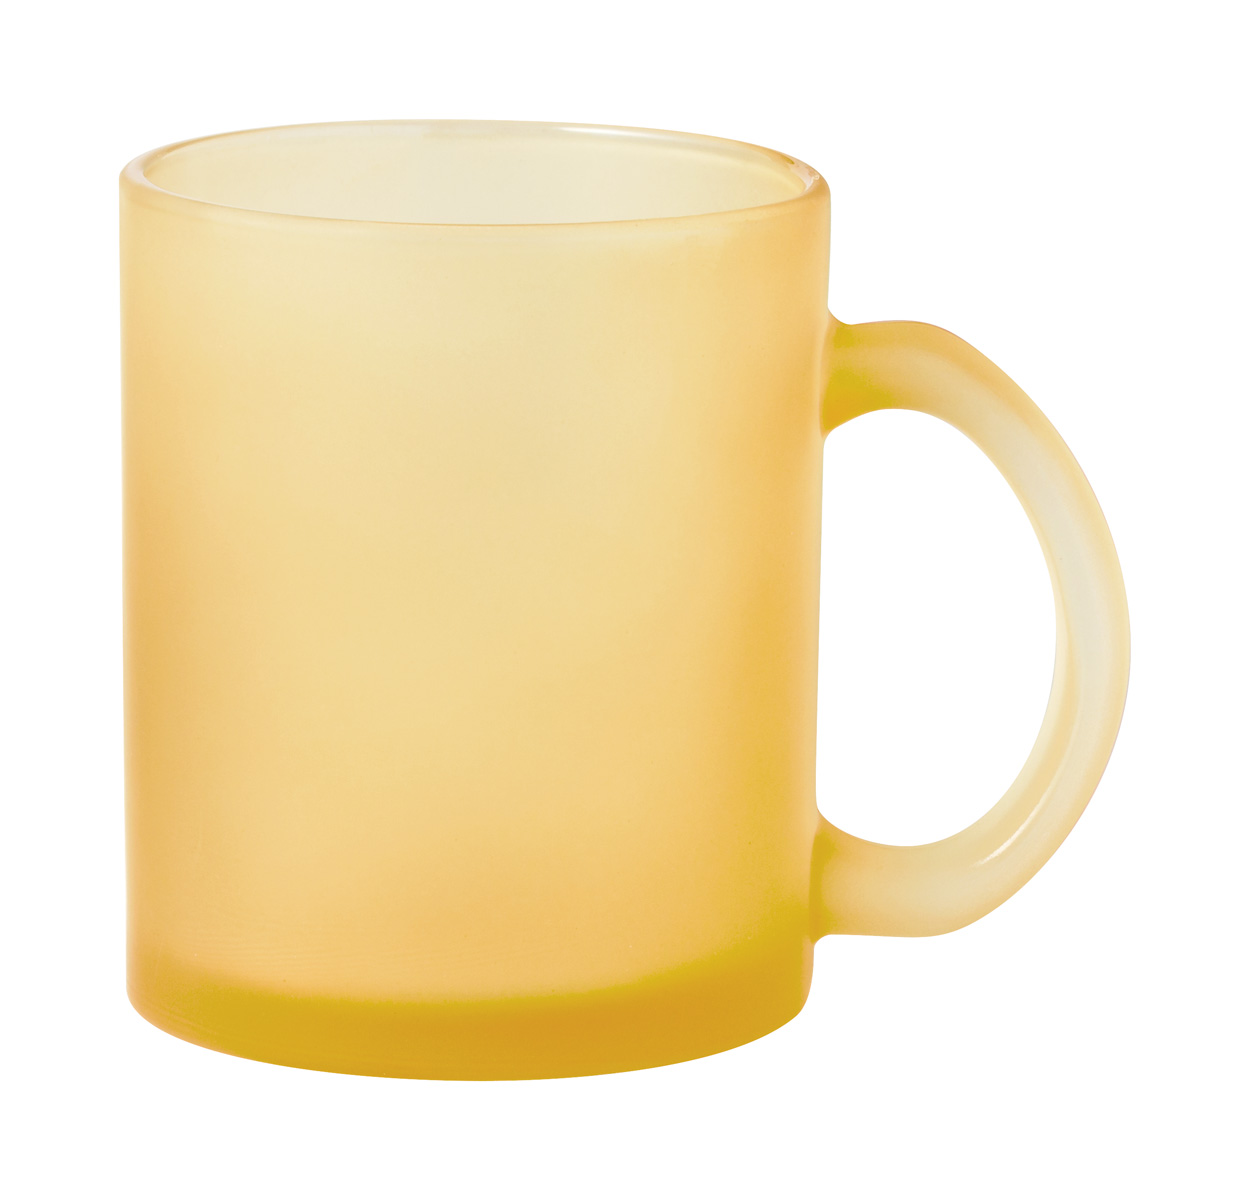 Cervan mug for sublimation - yellow